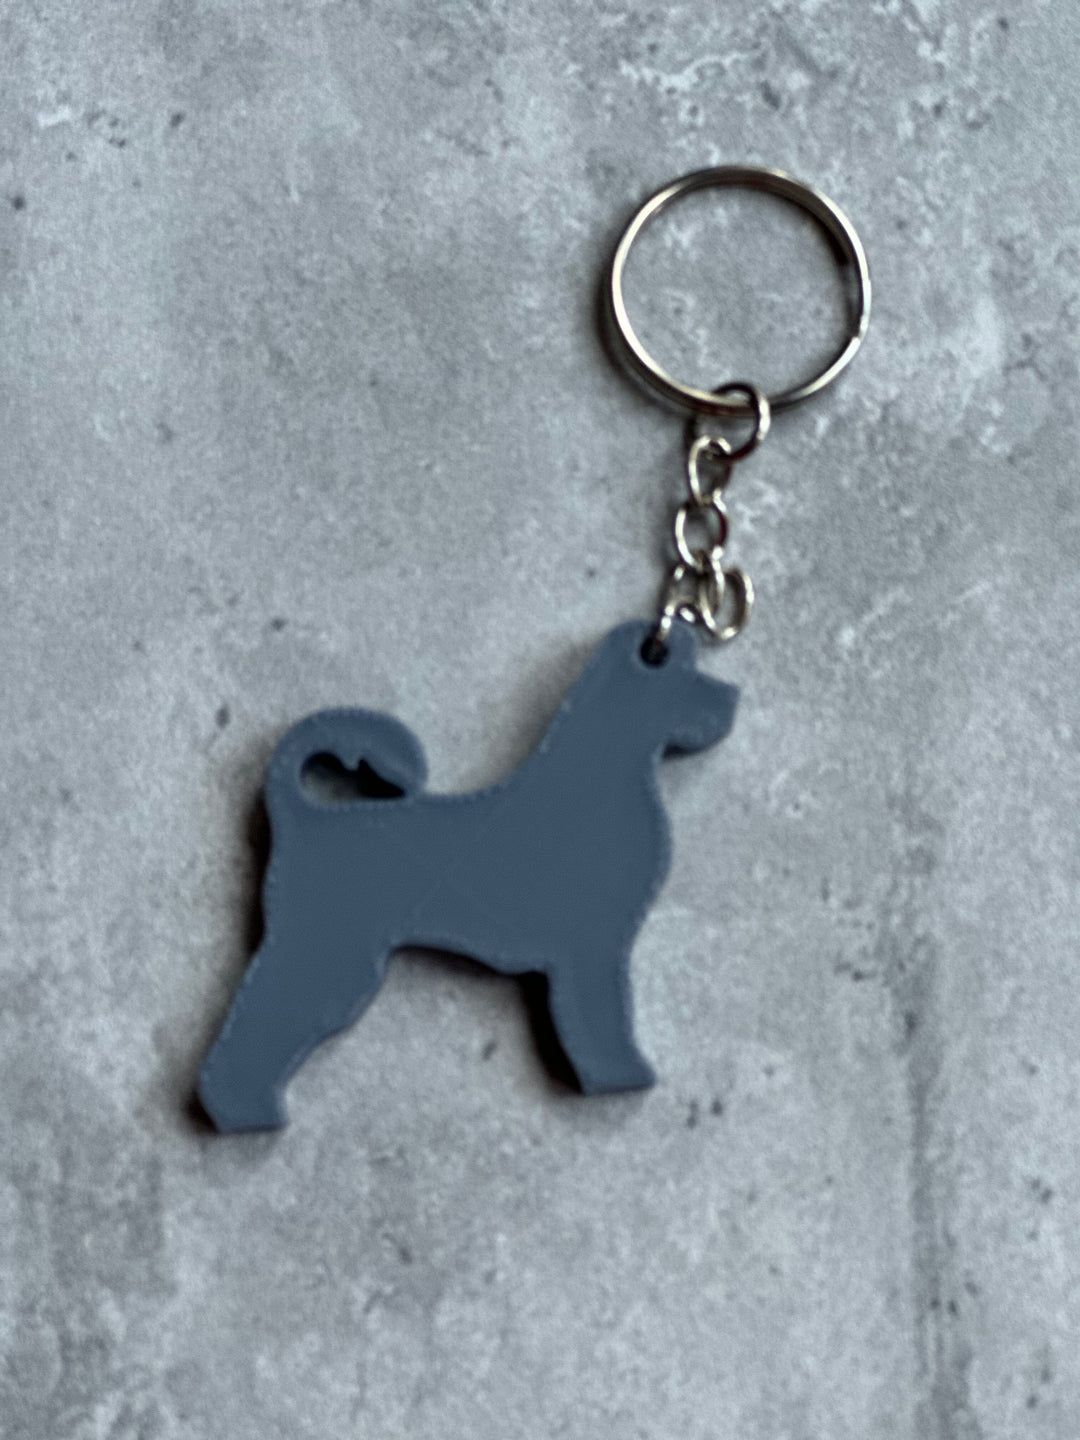 Spanish Water Dog Keyring Stl File. | 3D Printed | Unique Personalised Gifts